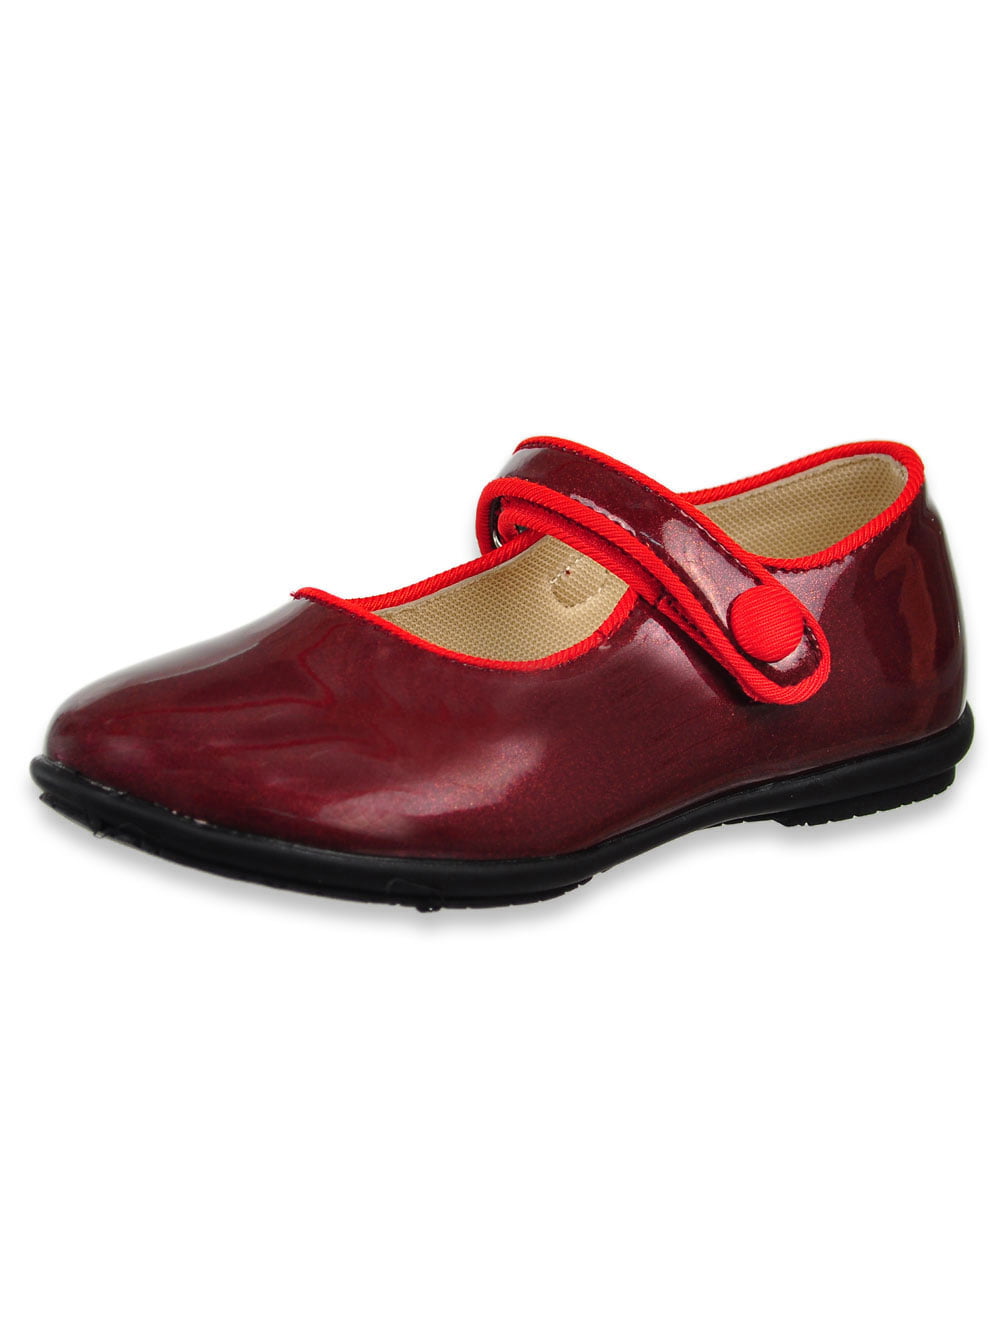 Easy Strider Girls' Mary Jane Shoes (Sizes 7 - 3) - maroon, 7 toddler ...